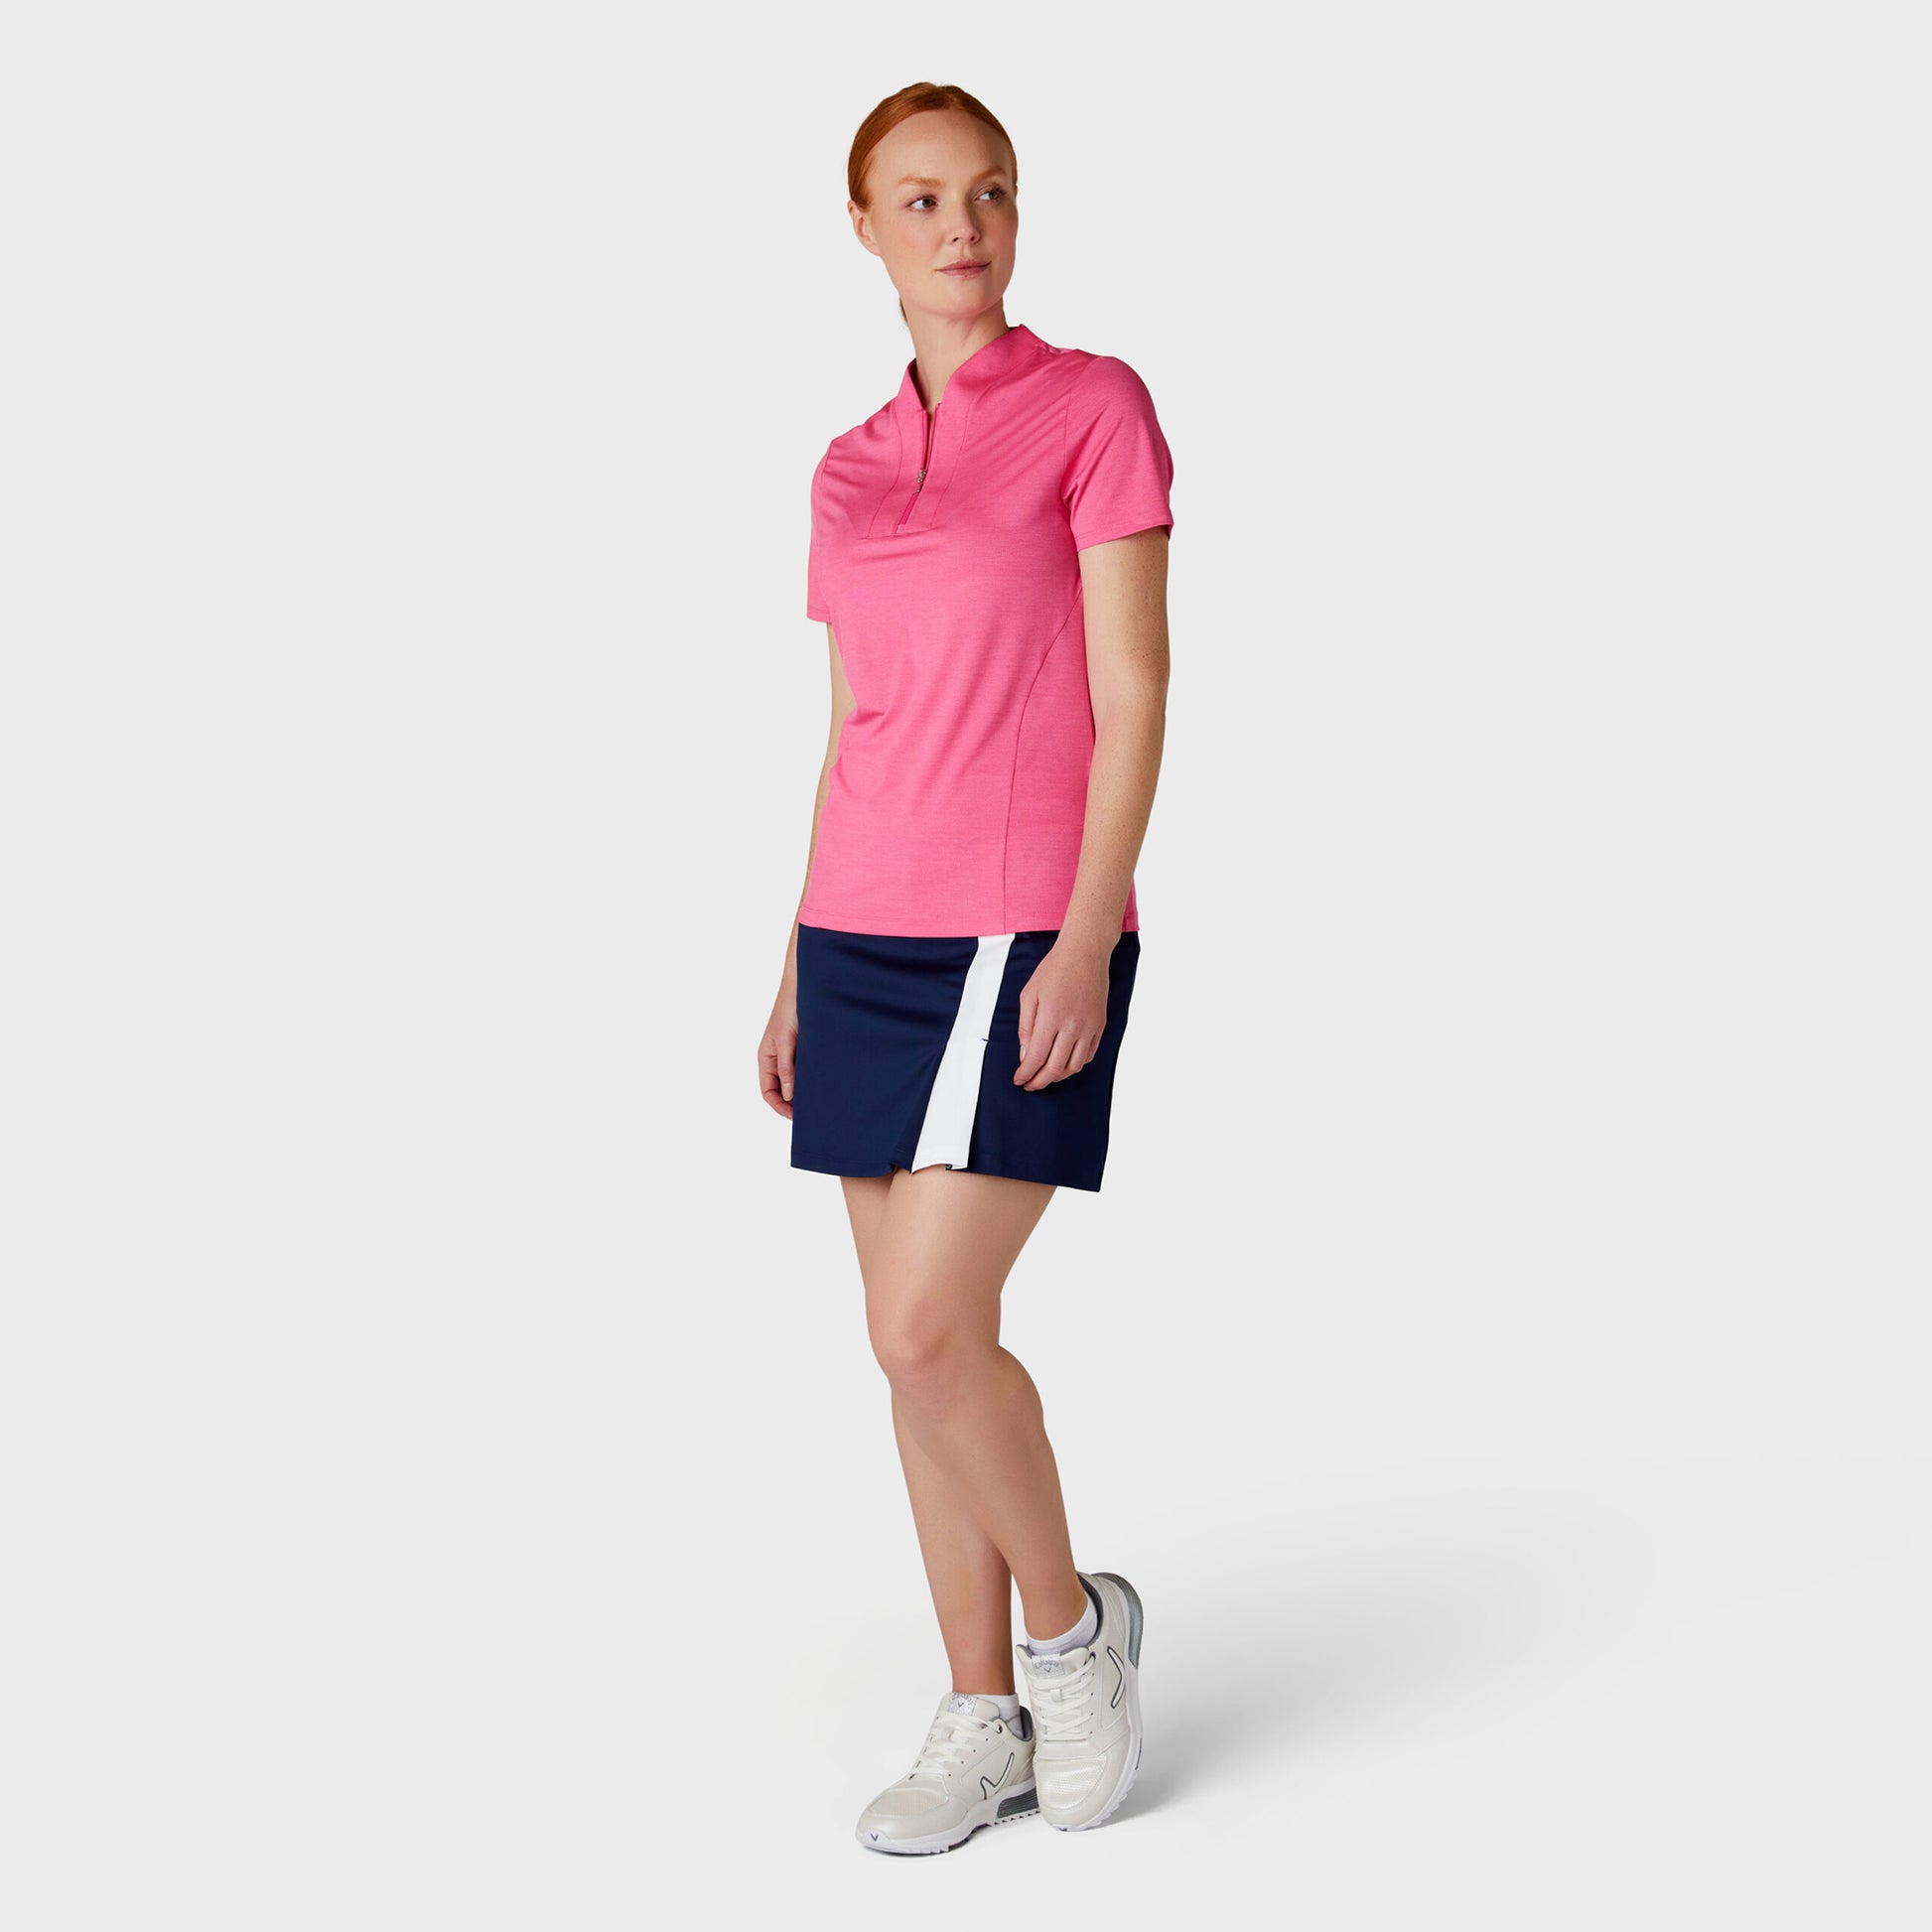 Callaway Ladies Tonal Textured Golf Polo in Pink Peacock with Zip Neck